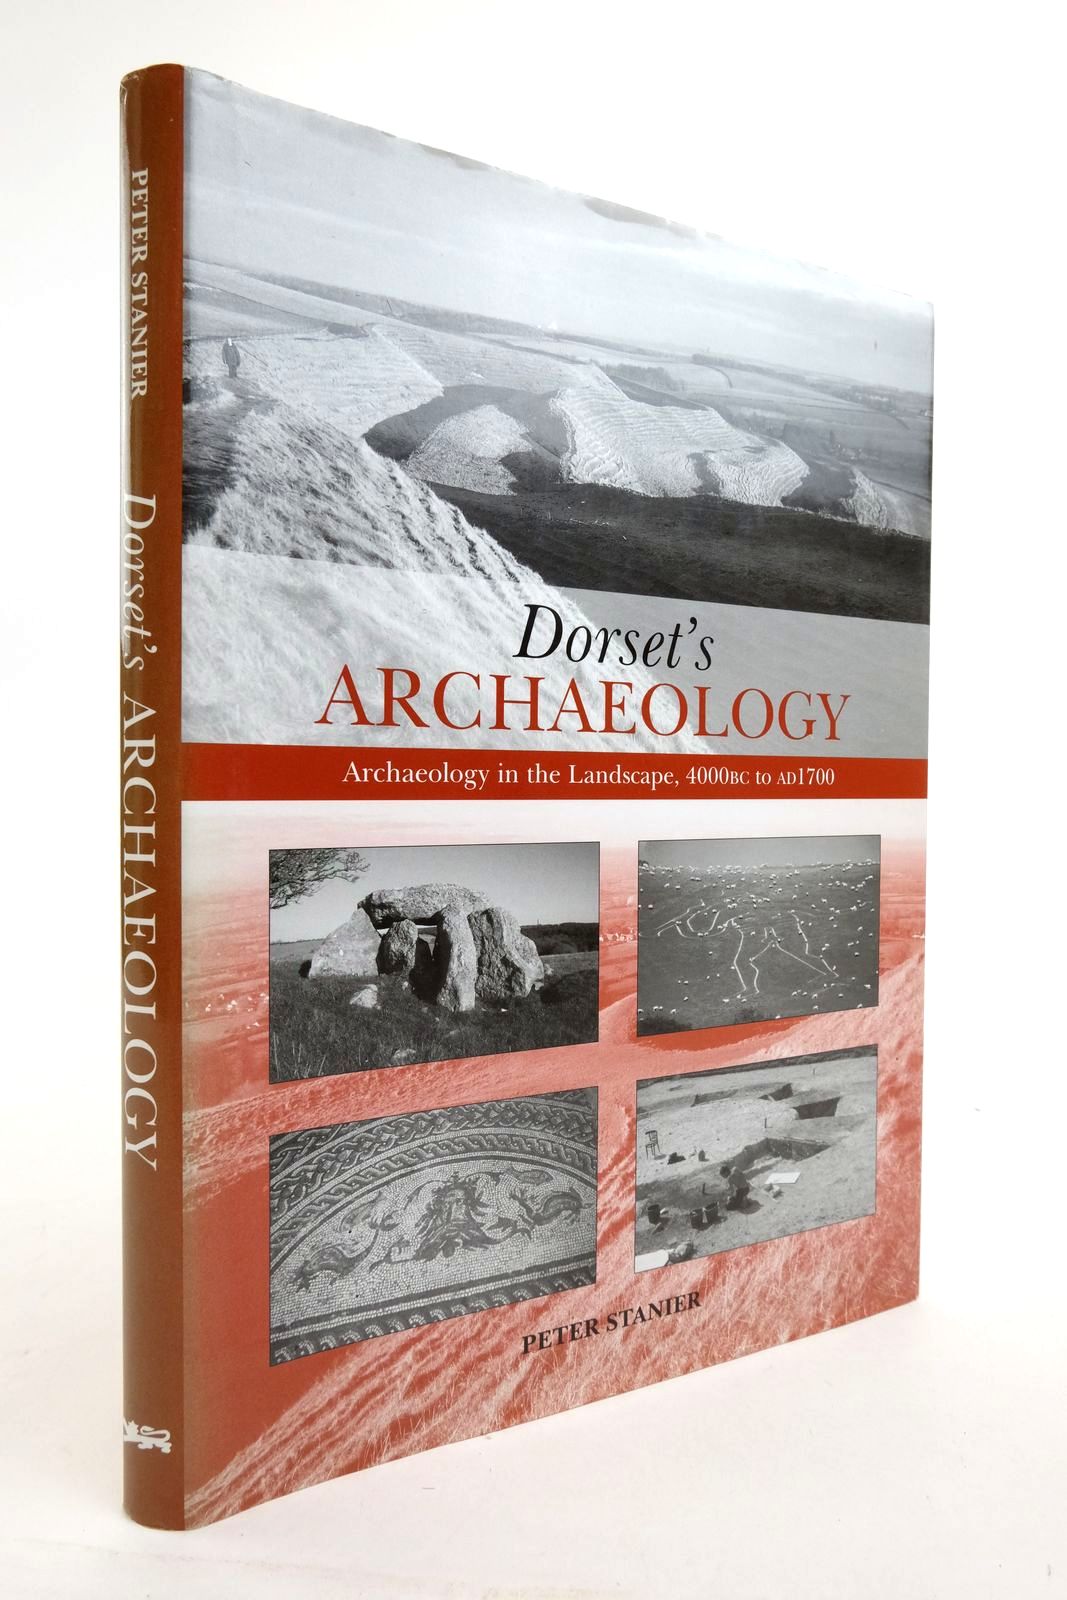 Photo of DORSET'S ARCHAEOLOGY written by Stanier, Peter published by Dorset Books (STOCK CODE: 2137706)  for sale by Stella & Rose's Books